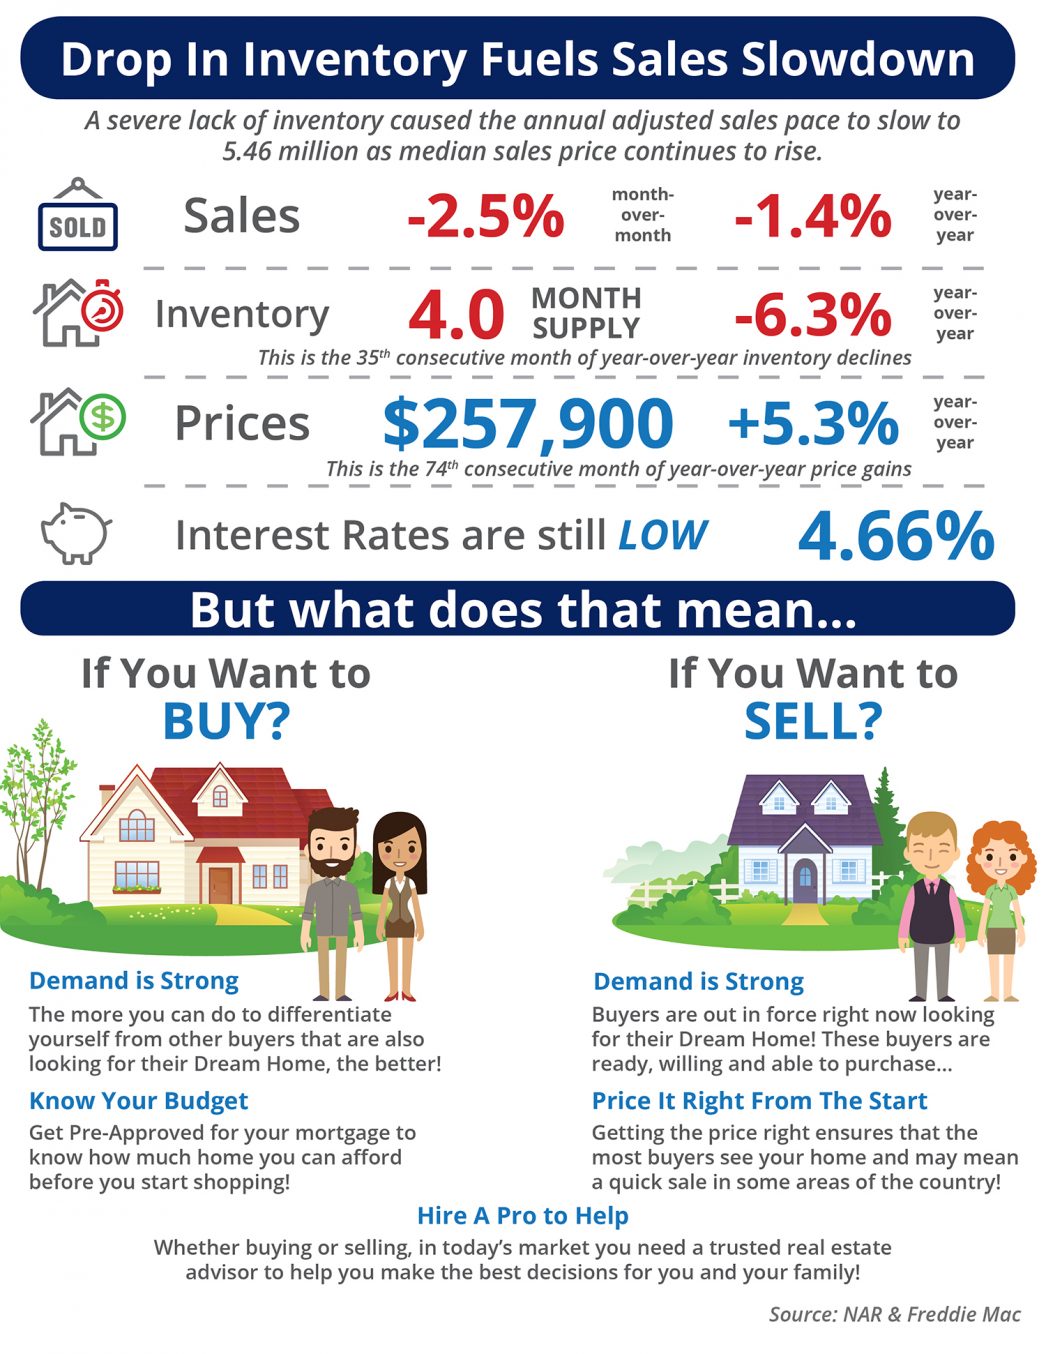 Drop in Inventory Fuels Sales Slowdown [INFOGRAPHIC] | MyKCM